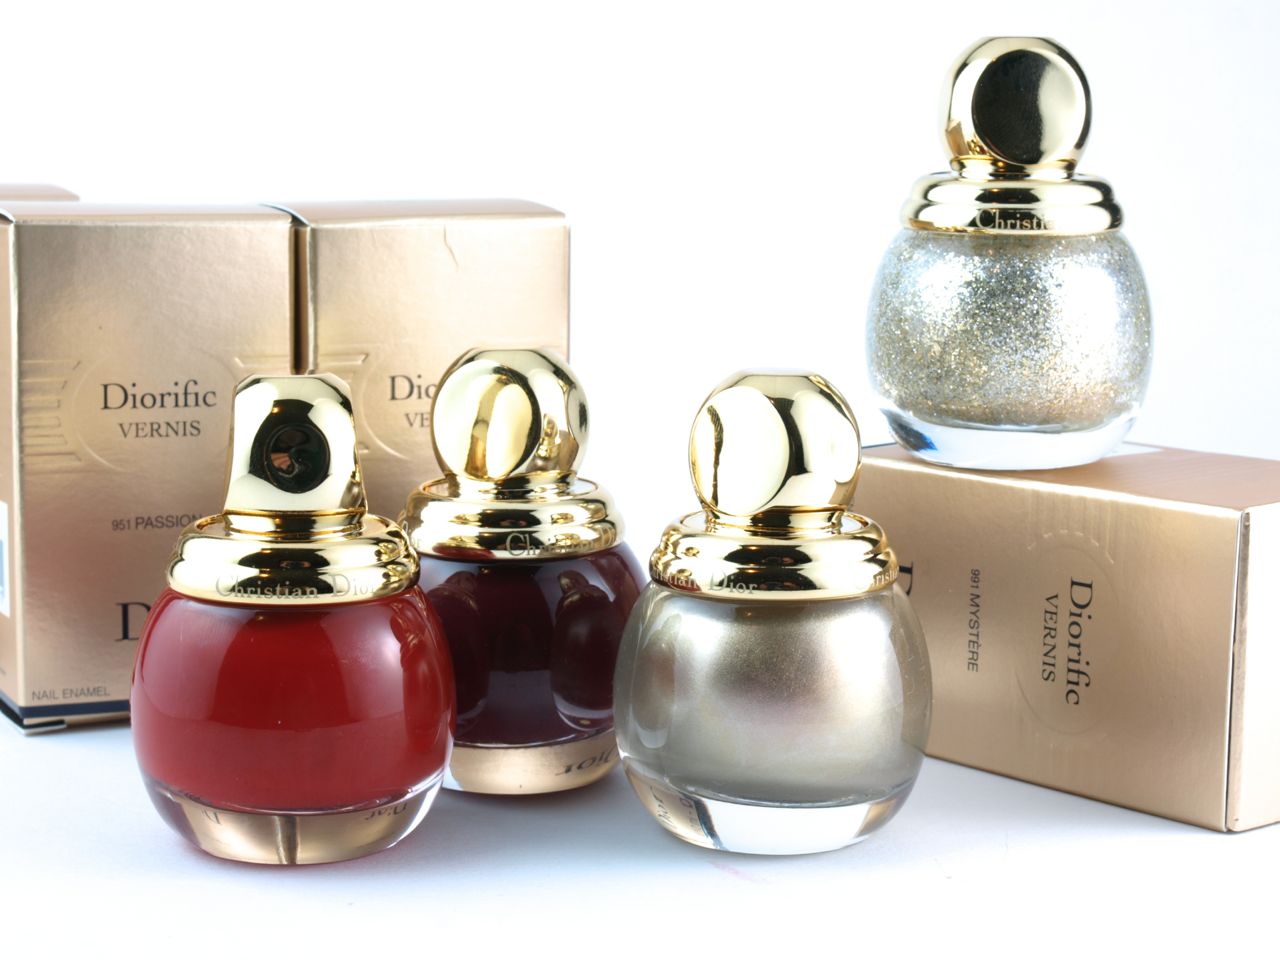 Dior Holiday 2015 Diorific Vernis: Review and Swatches